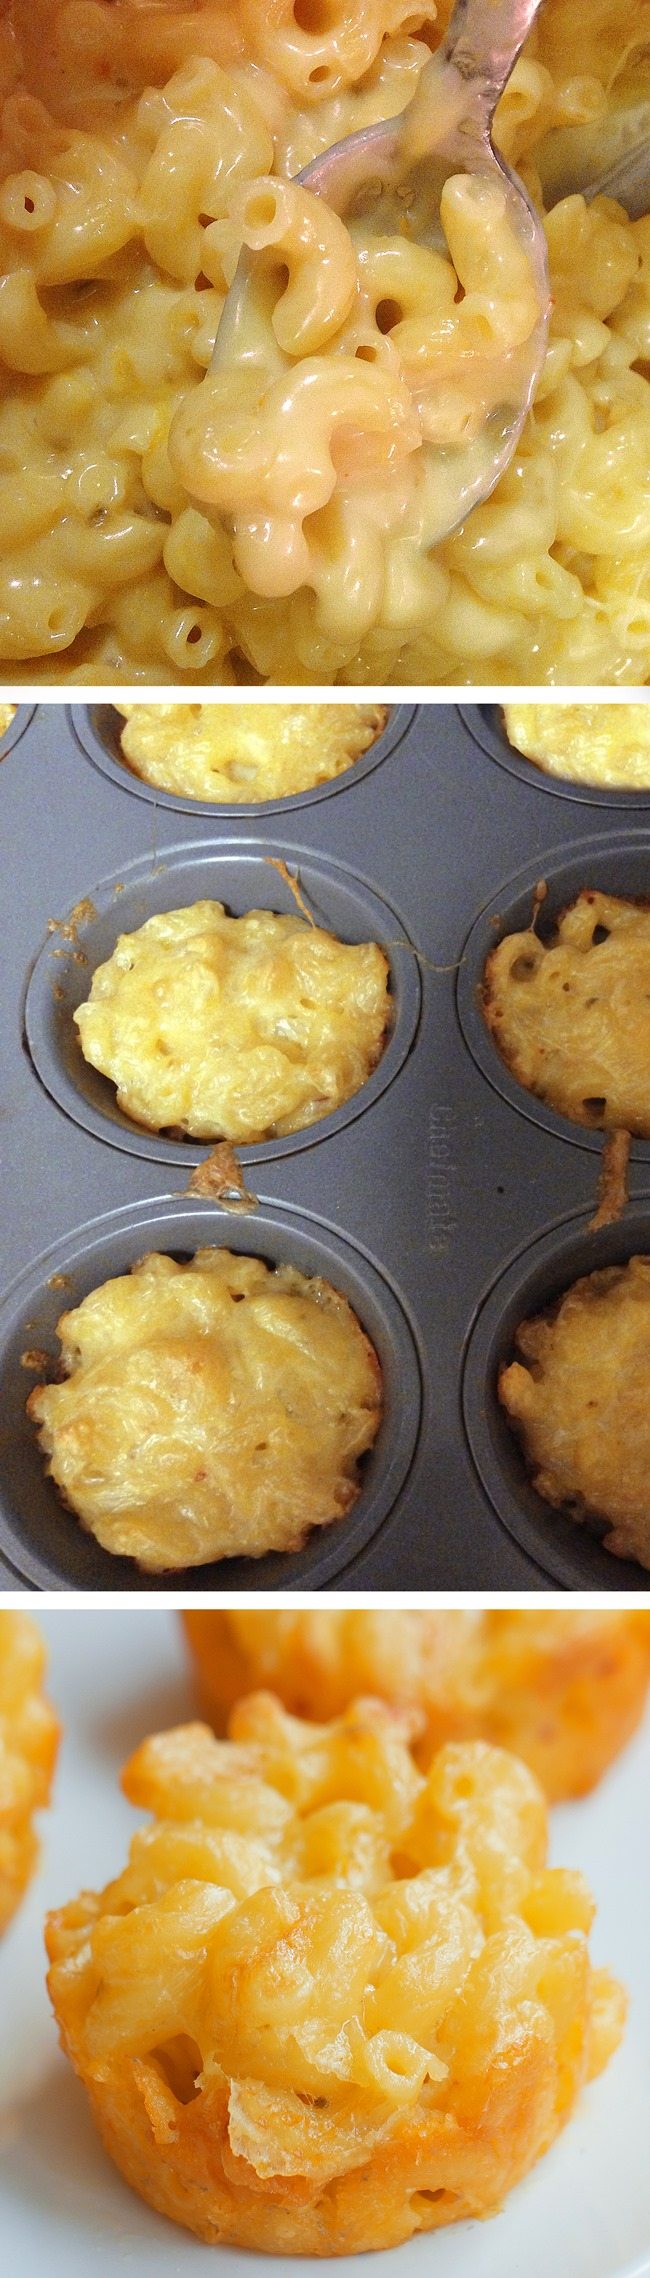 Mac & Cheese To Go – from @choccoveredkt – Bake them in a muffin tin for an easy "on the go" snack... Great for lunchboxes too... https://chocolatecoveredkatie.com/2016/02/01/baked-mac-cheese-cups-go/